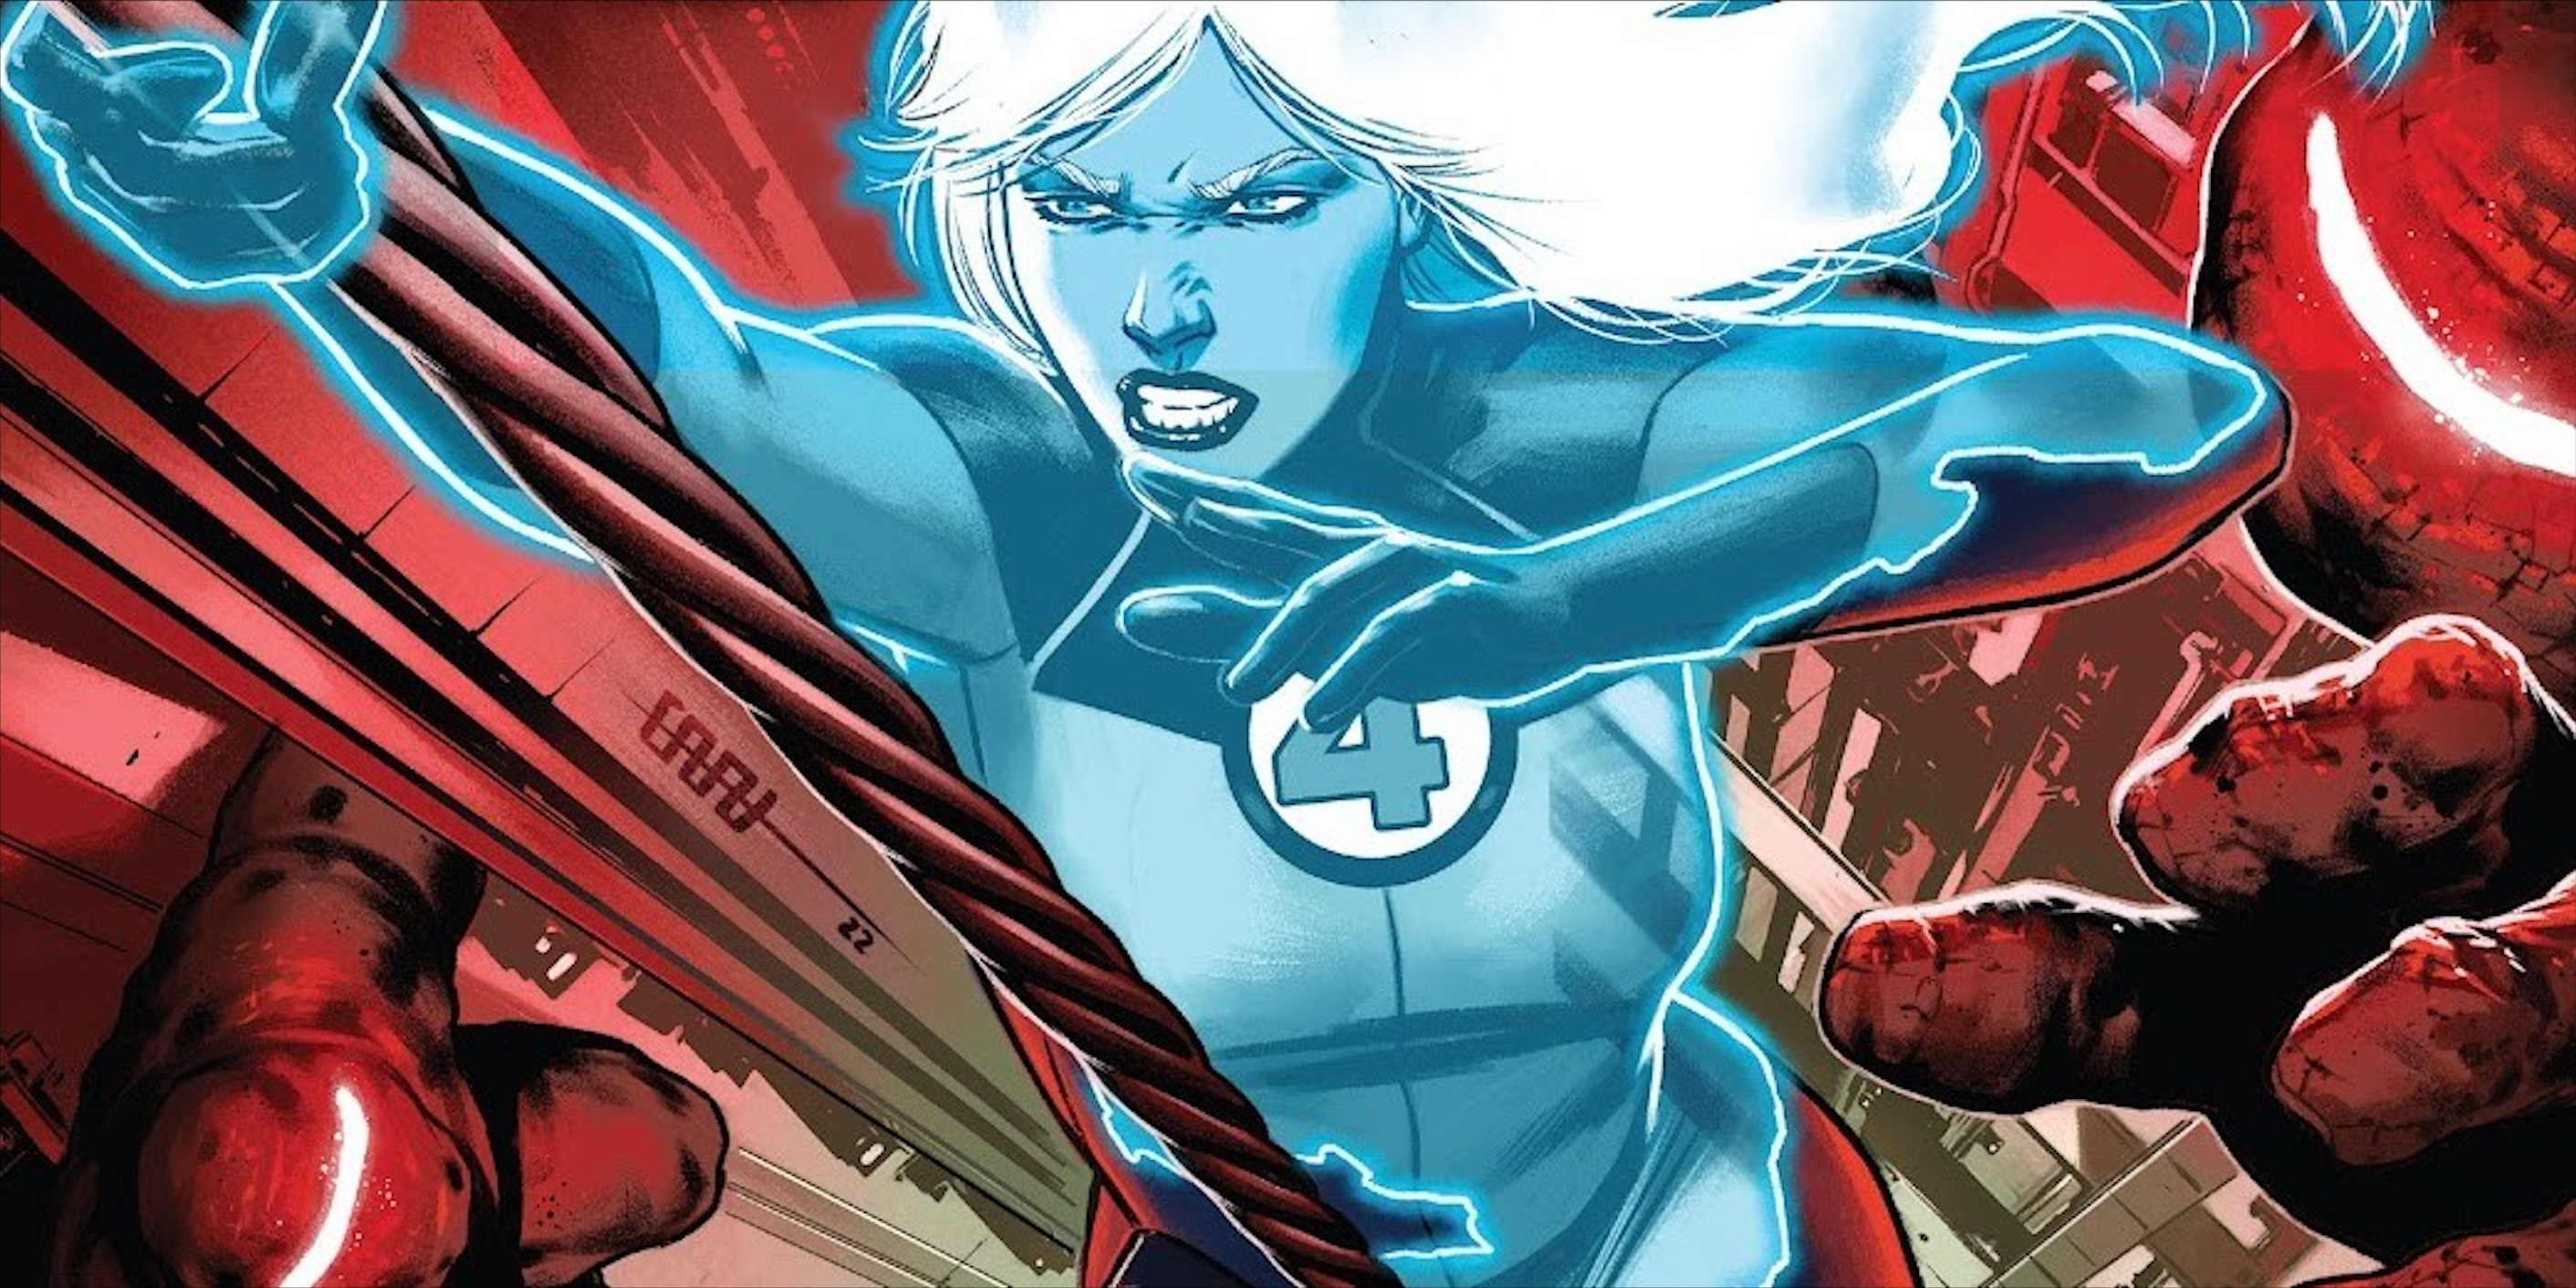 Sue Storm in the Fantastic Four unleashes full power